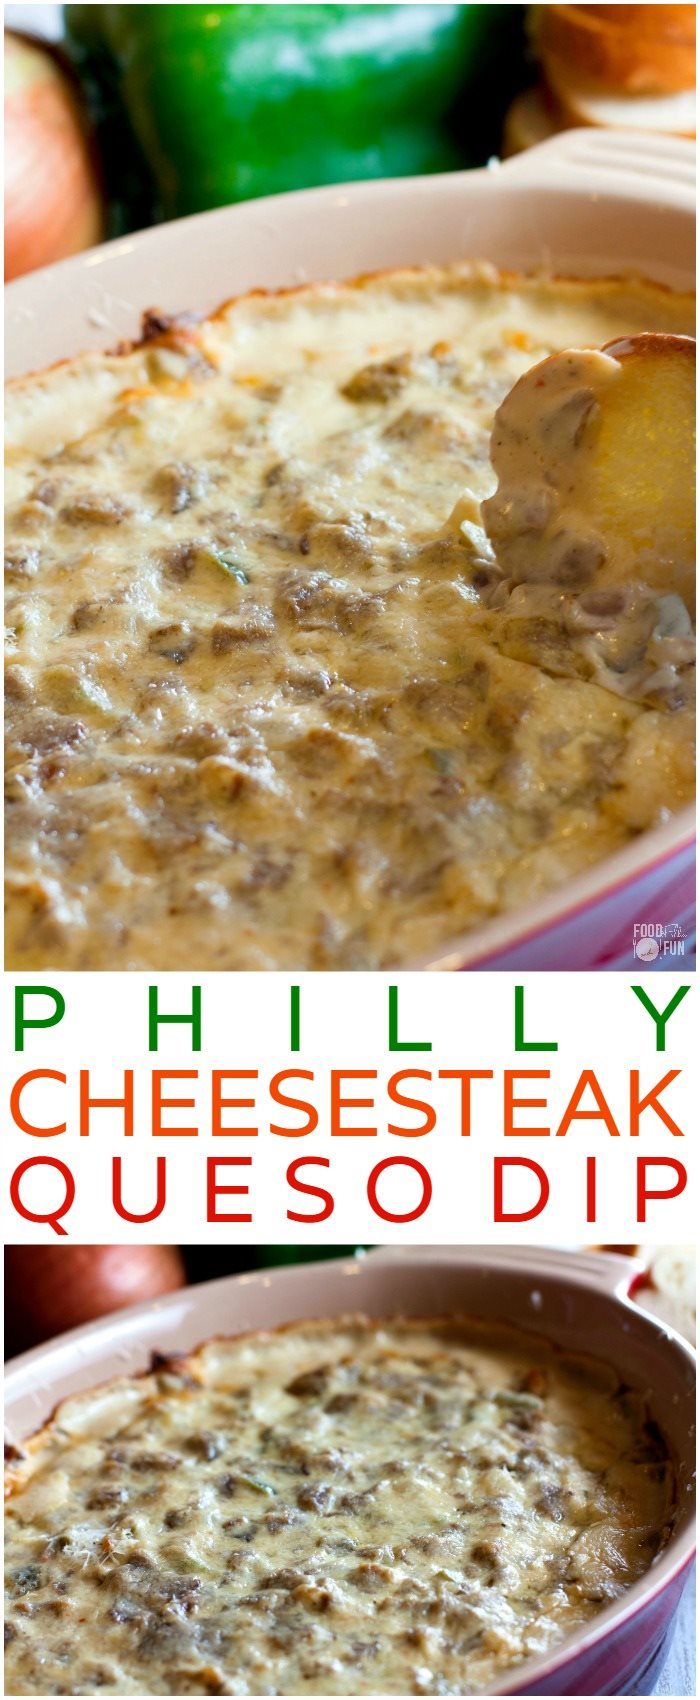 This hot, cheesy Philly Cheesesteak Dip is one of the best queso dips I have EVER had. It’s easy to make and it’s perfect for game day!